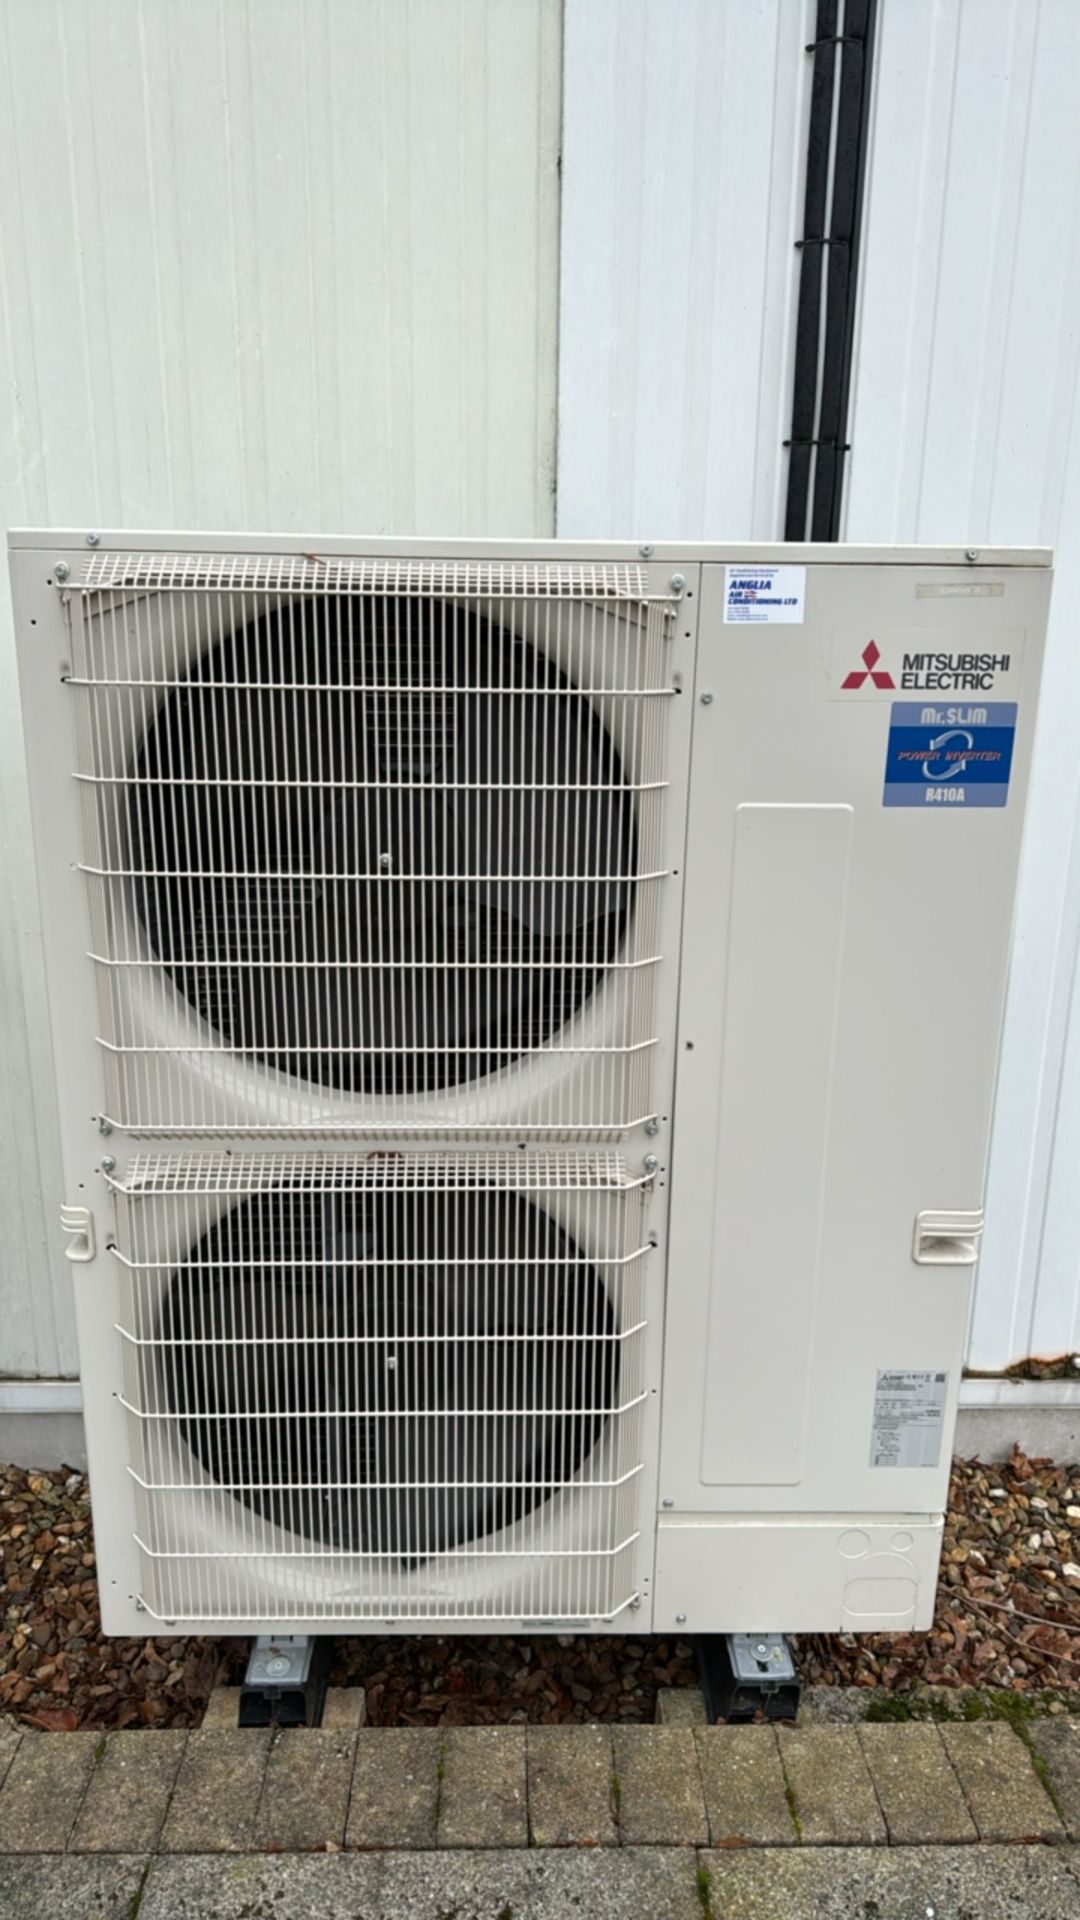 Mitsubishi Electric Air Conditioner - Image 3 of 3